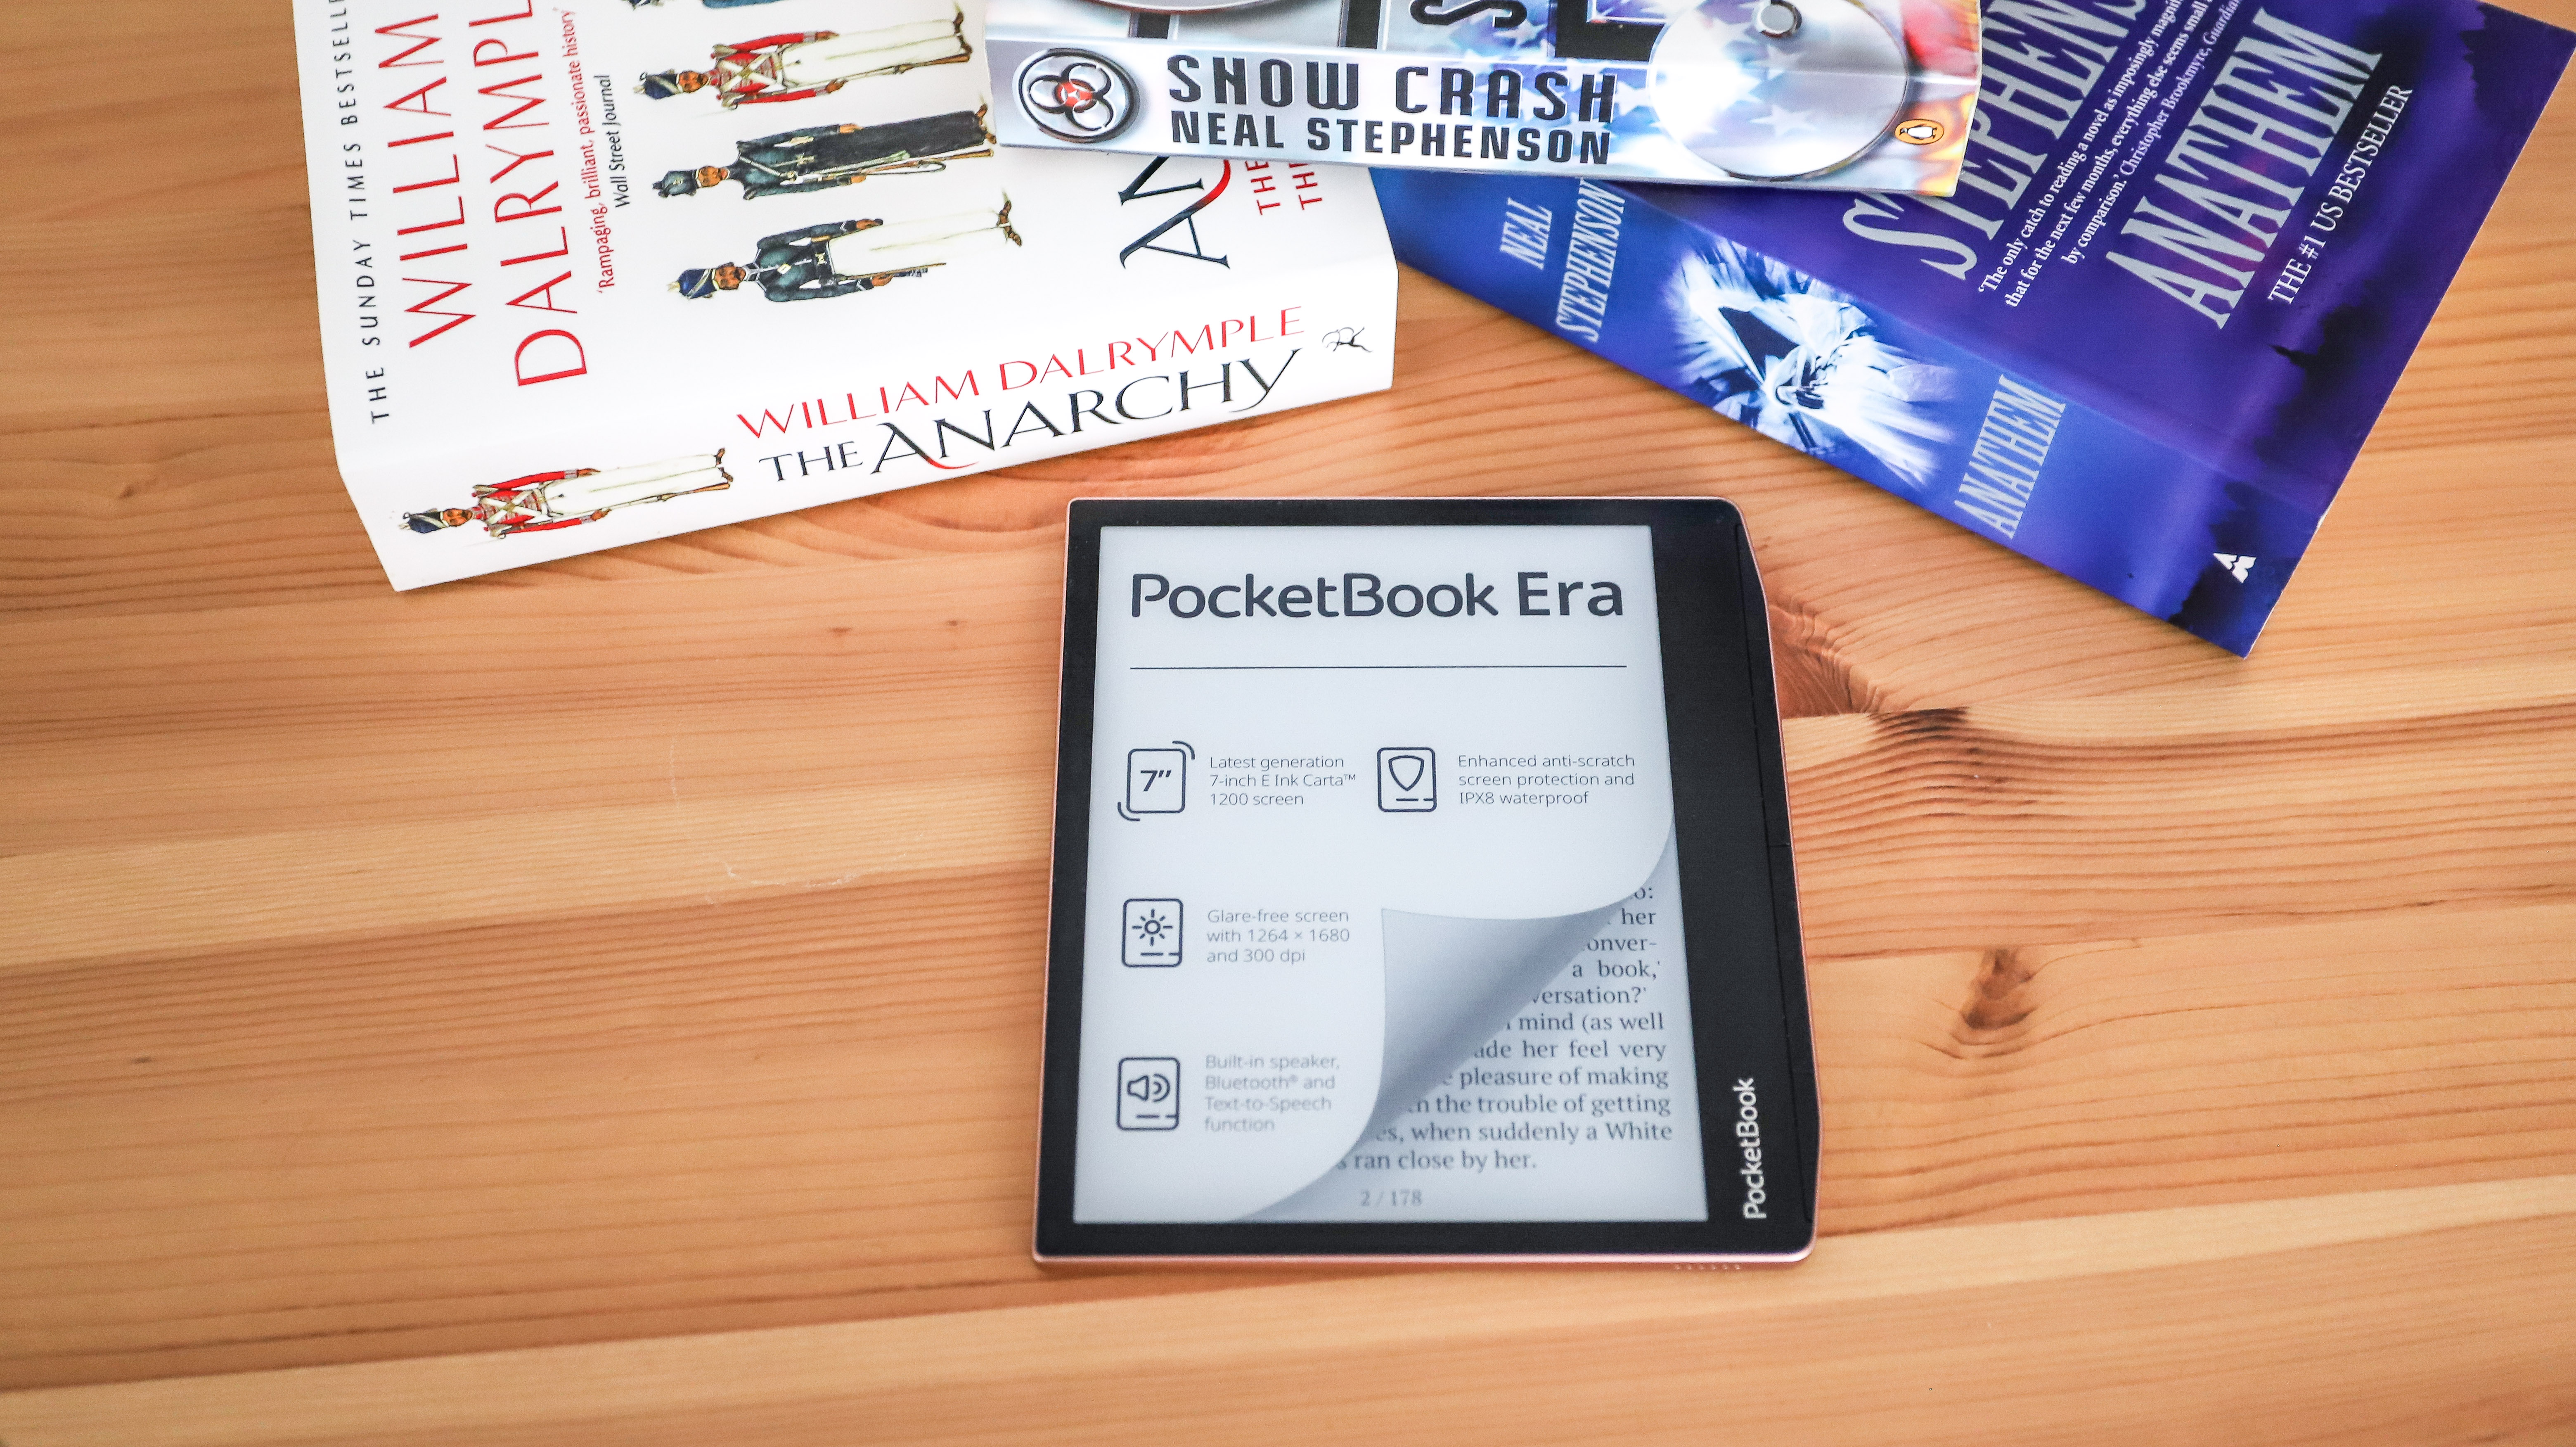 Review of the PocketBook Era reader: A new era of reading?